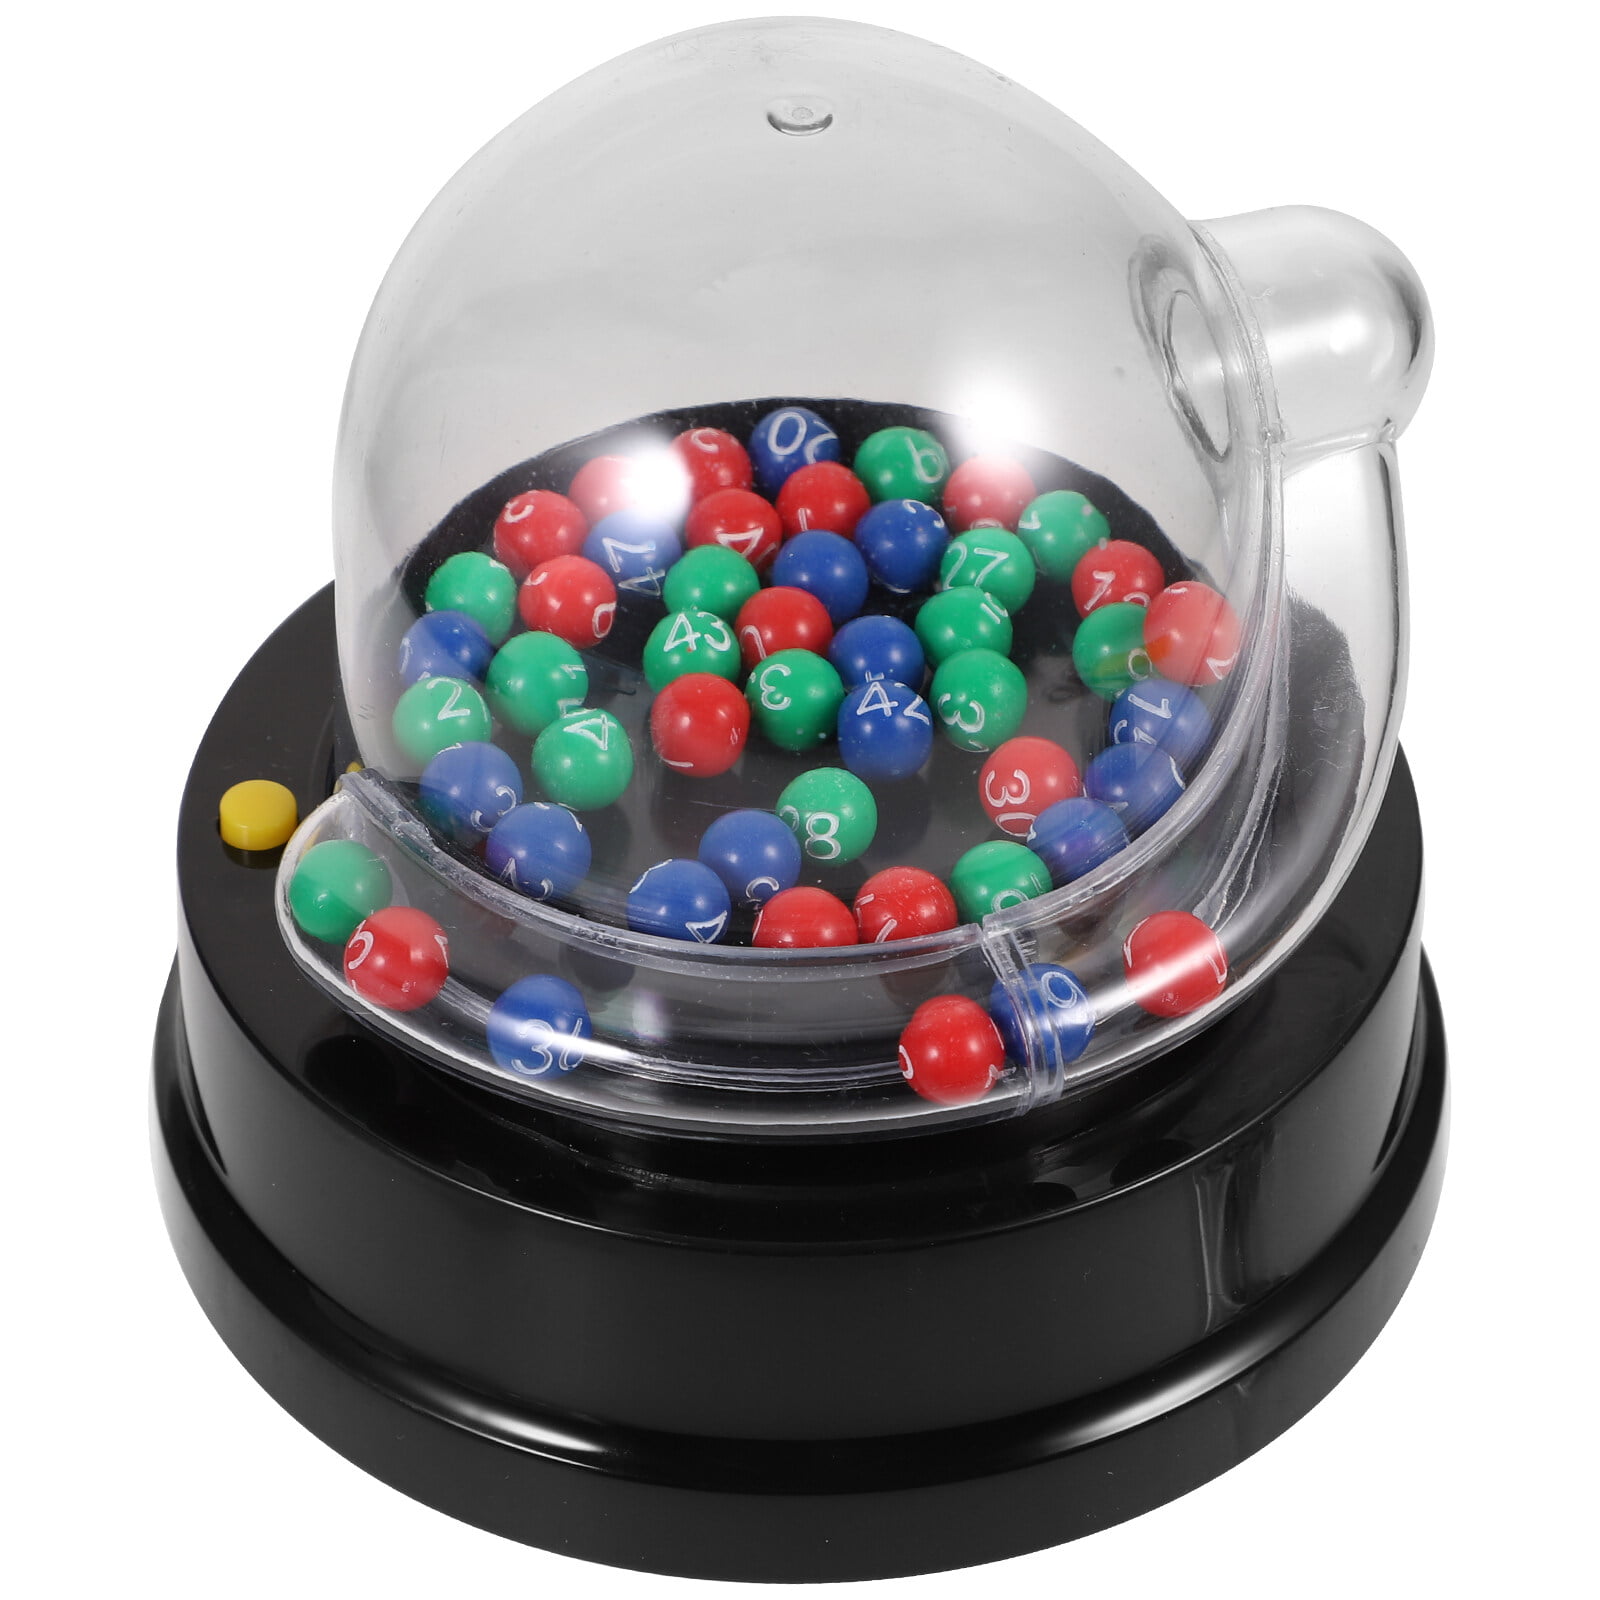  Toddmomy Electric Lotto Ball Machine Electric Lottery